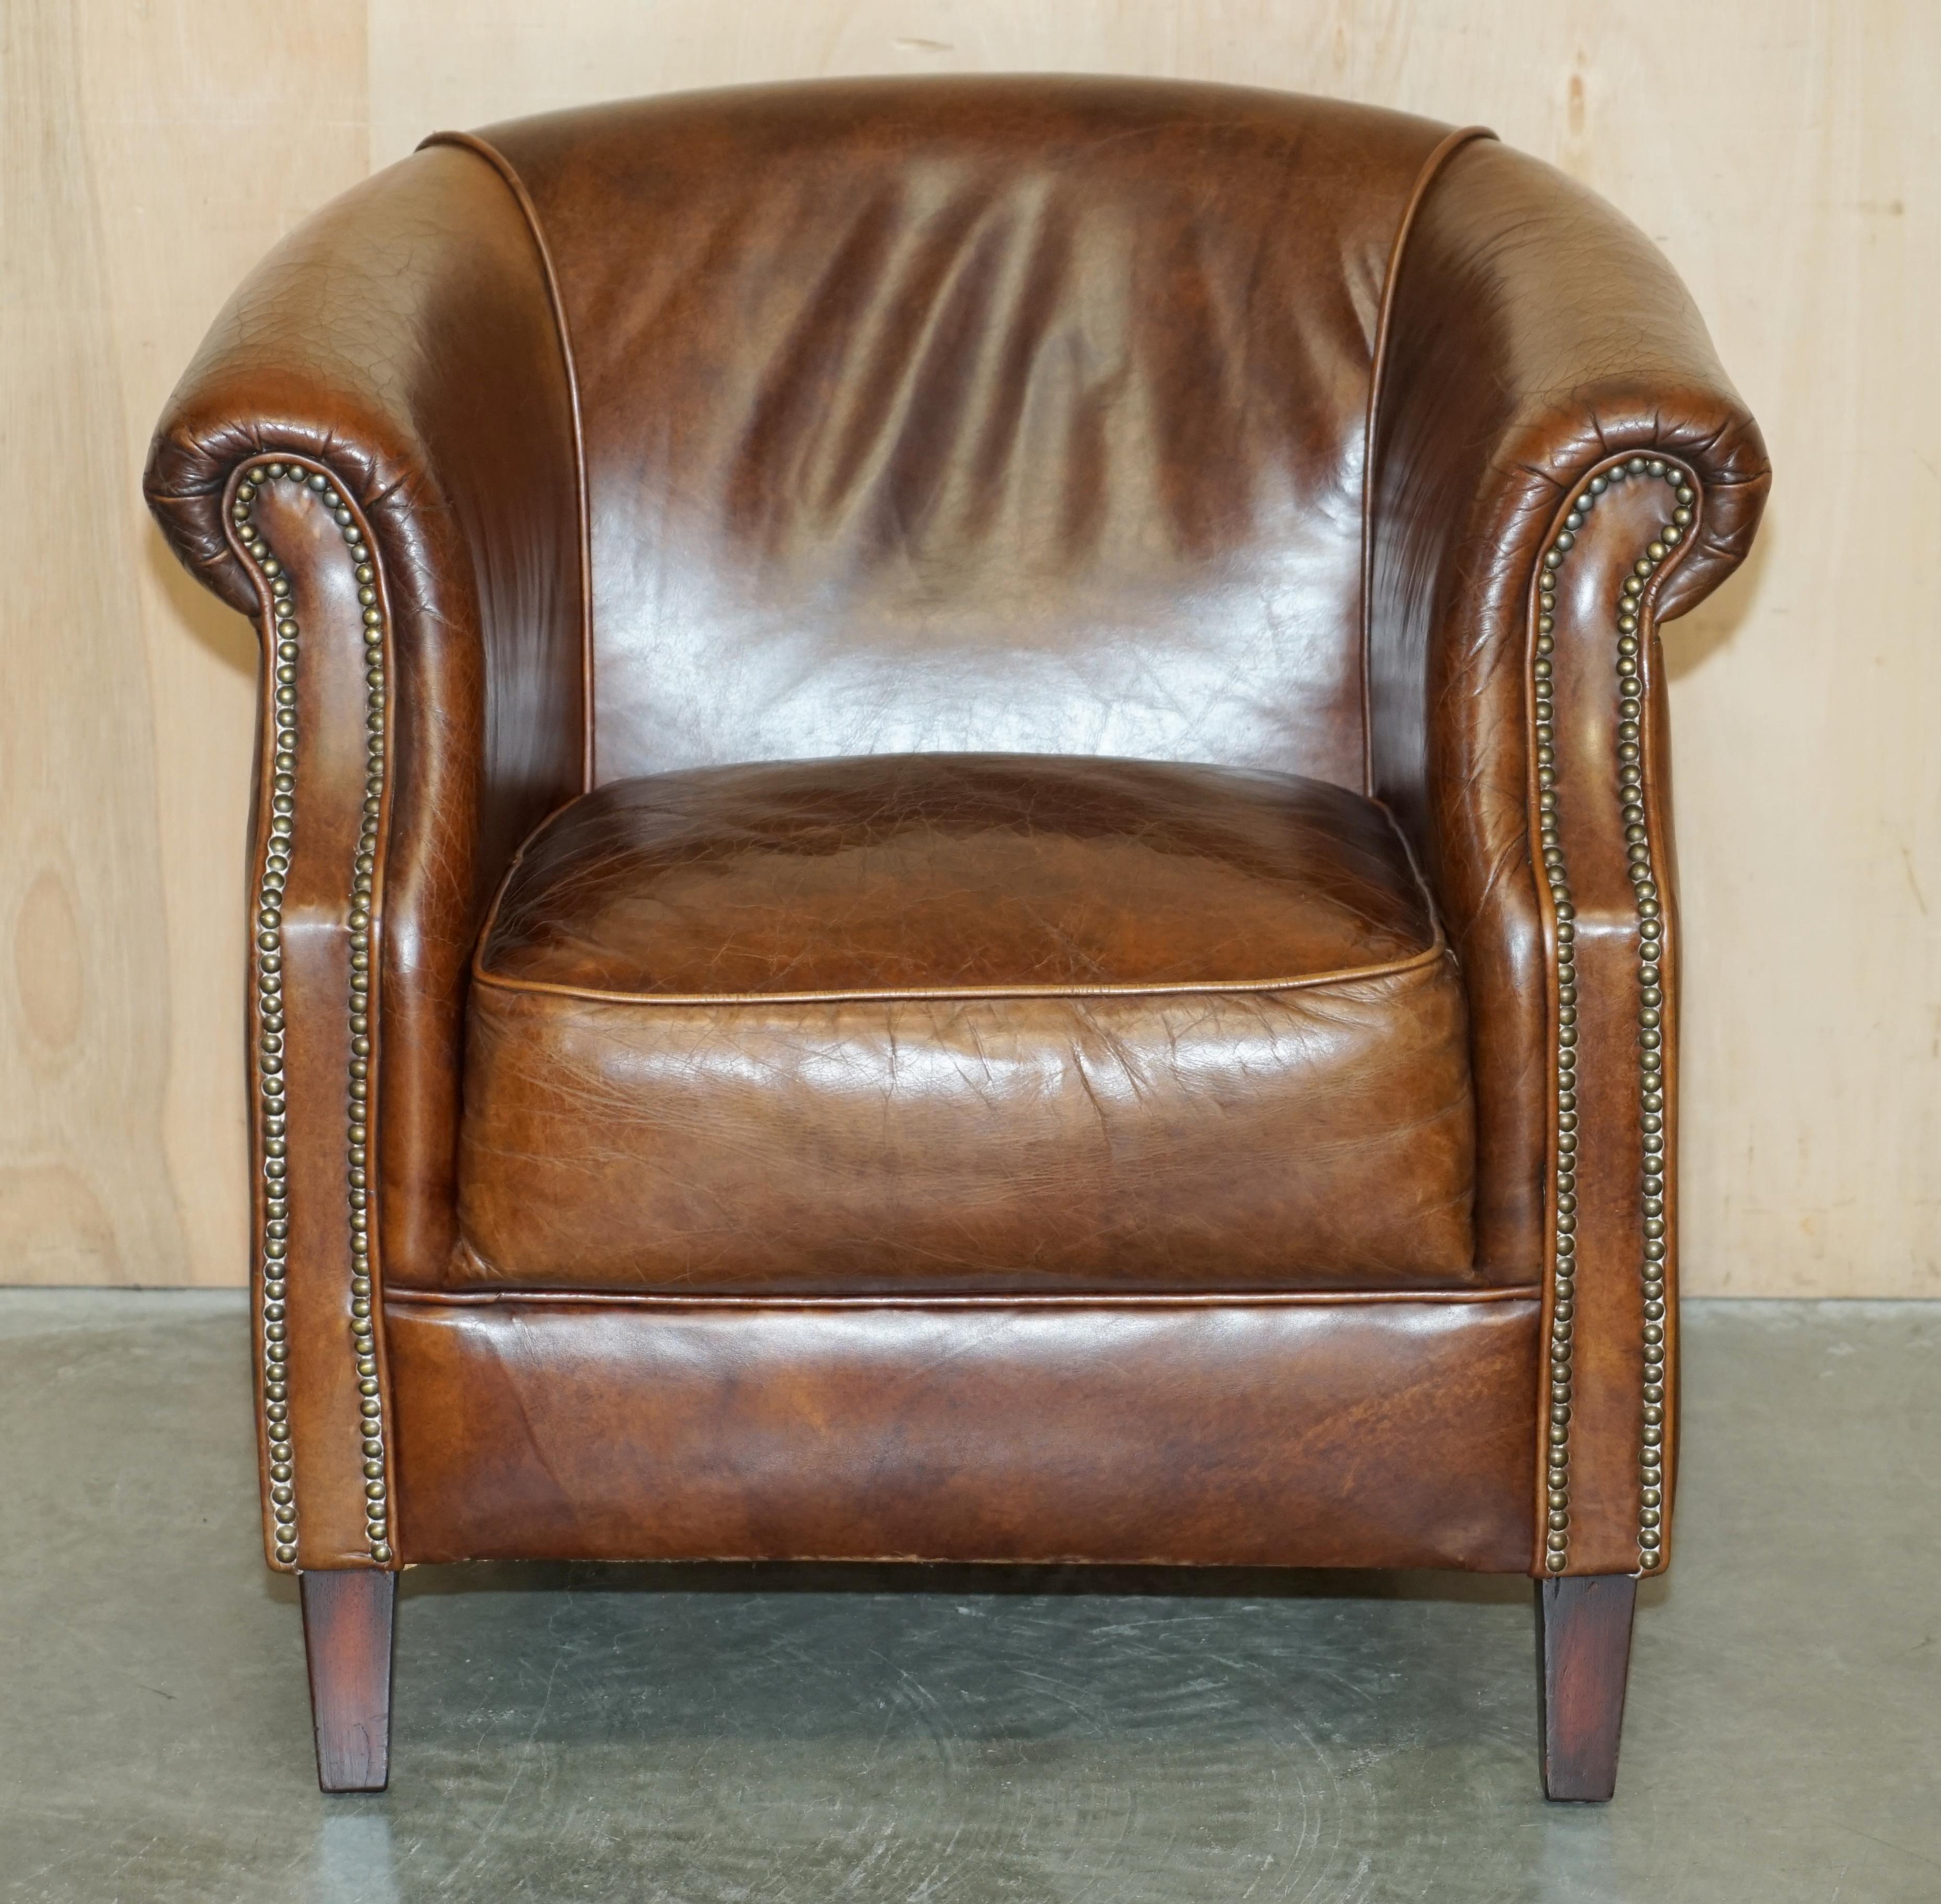 Royal House Antiques

Royal House Antiques is delighted to offer for sale this super comfortable, aged heritage brown leather tub club armchair 

Please note the delivery fee listed is just a guide, it covers within the M25 only for the UK and local